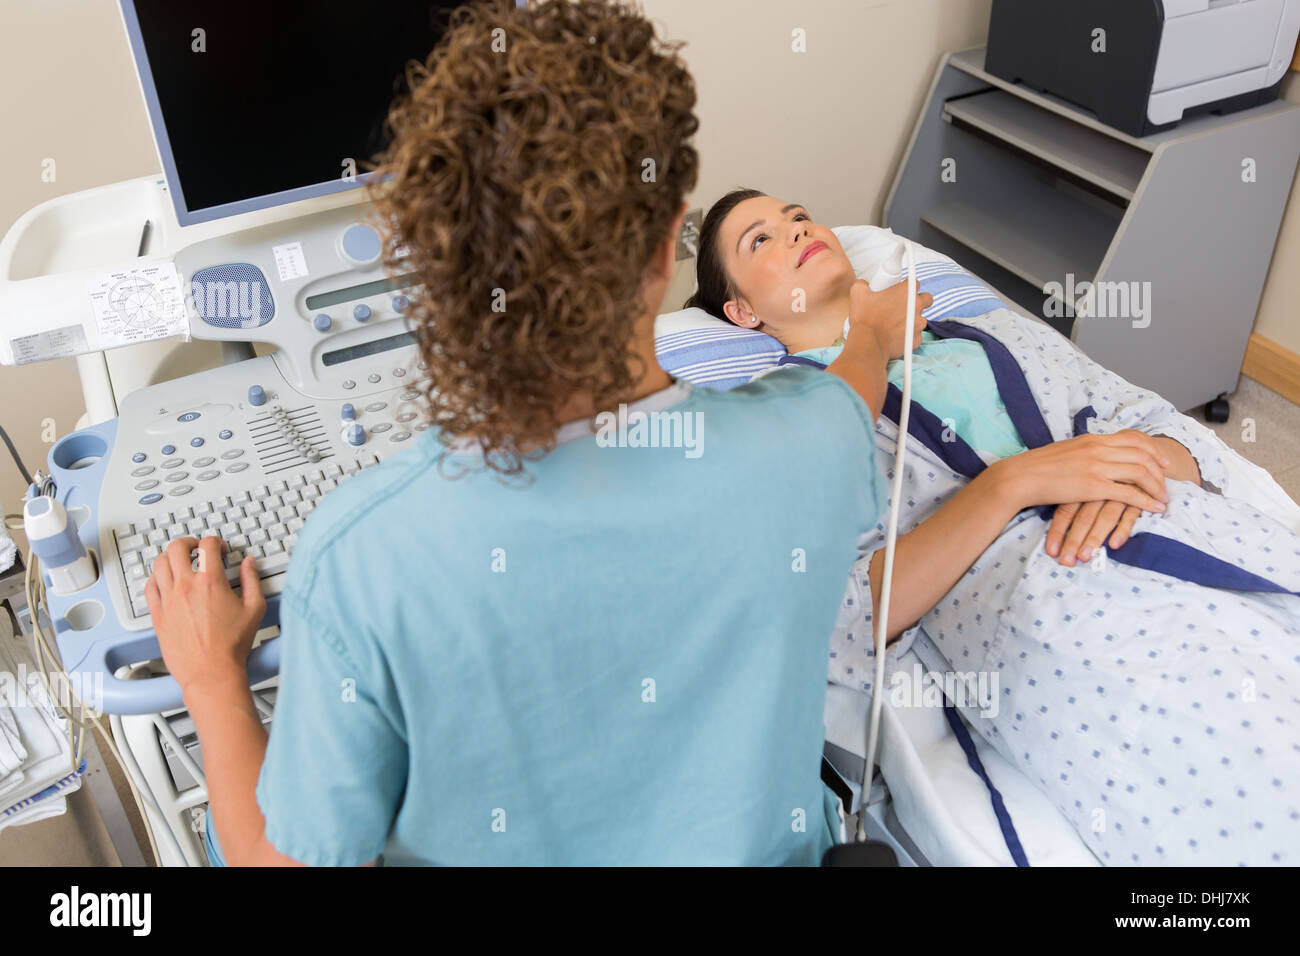 Nurse Performing Ultrasound Scan On Patients Neck Stock Photo Alamy